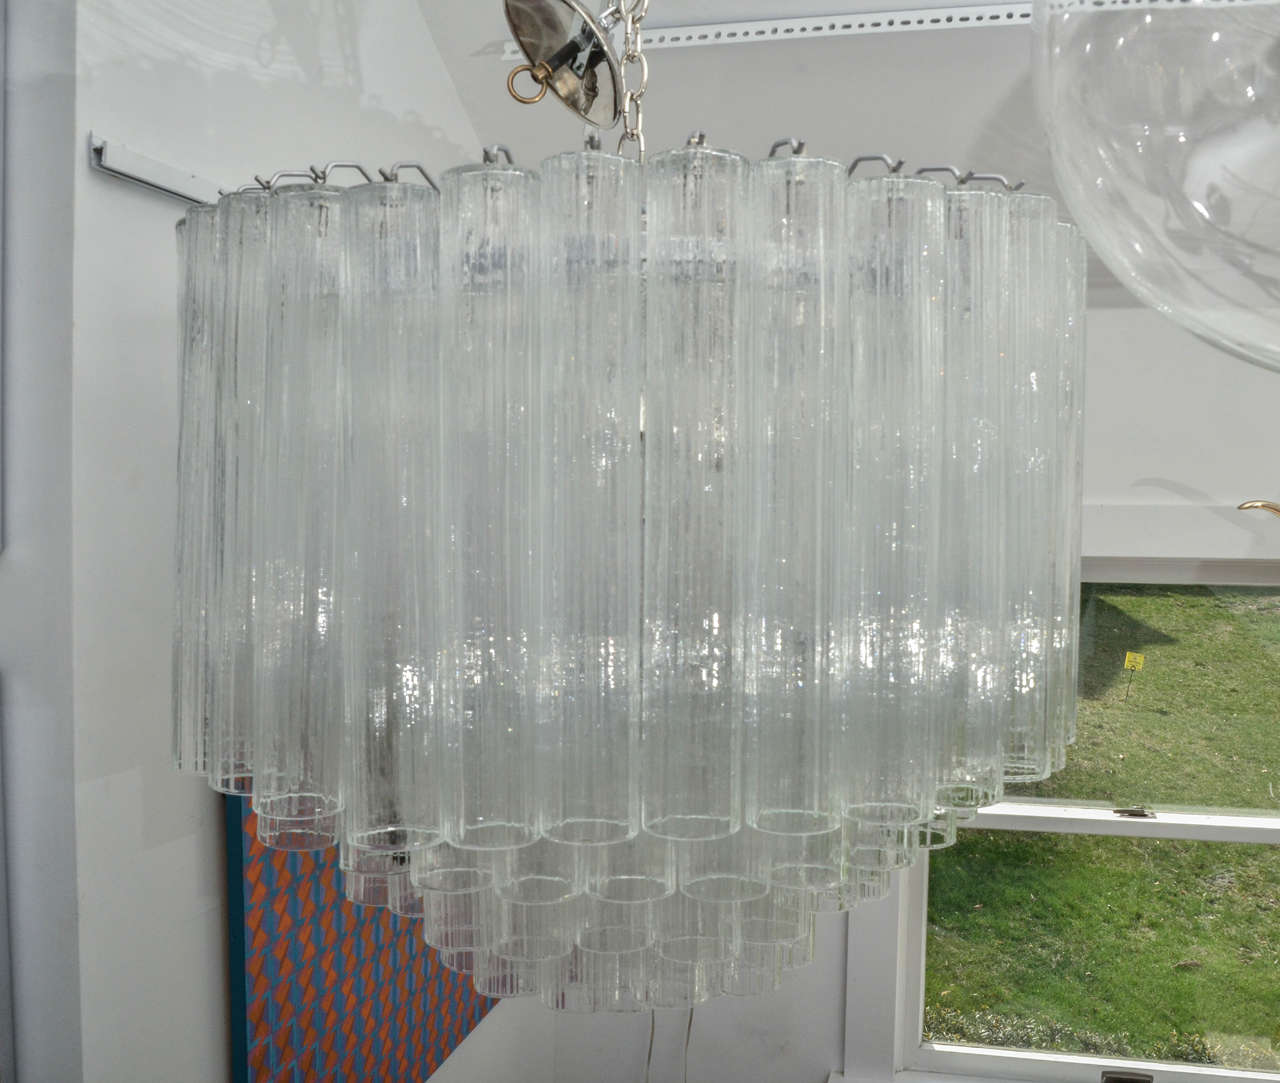 Multi-tiered chandelier composed of multiple glass tubes with nickel hardware.